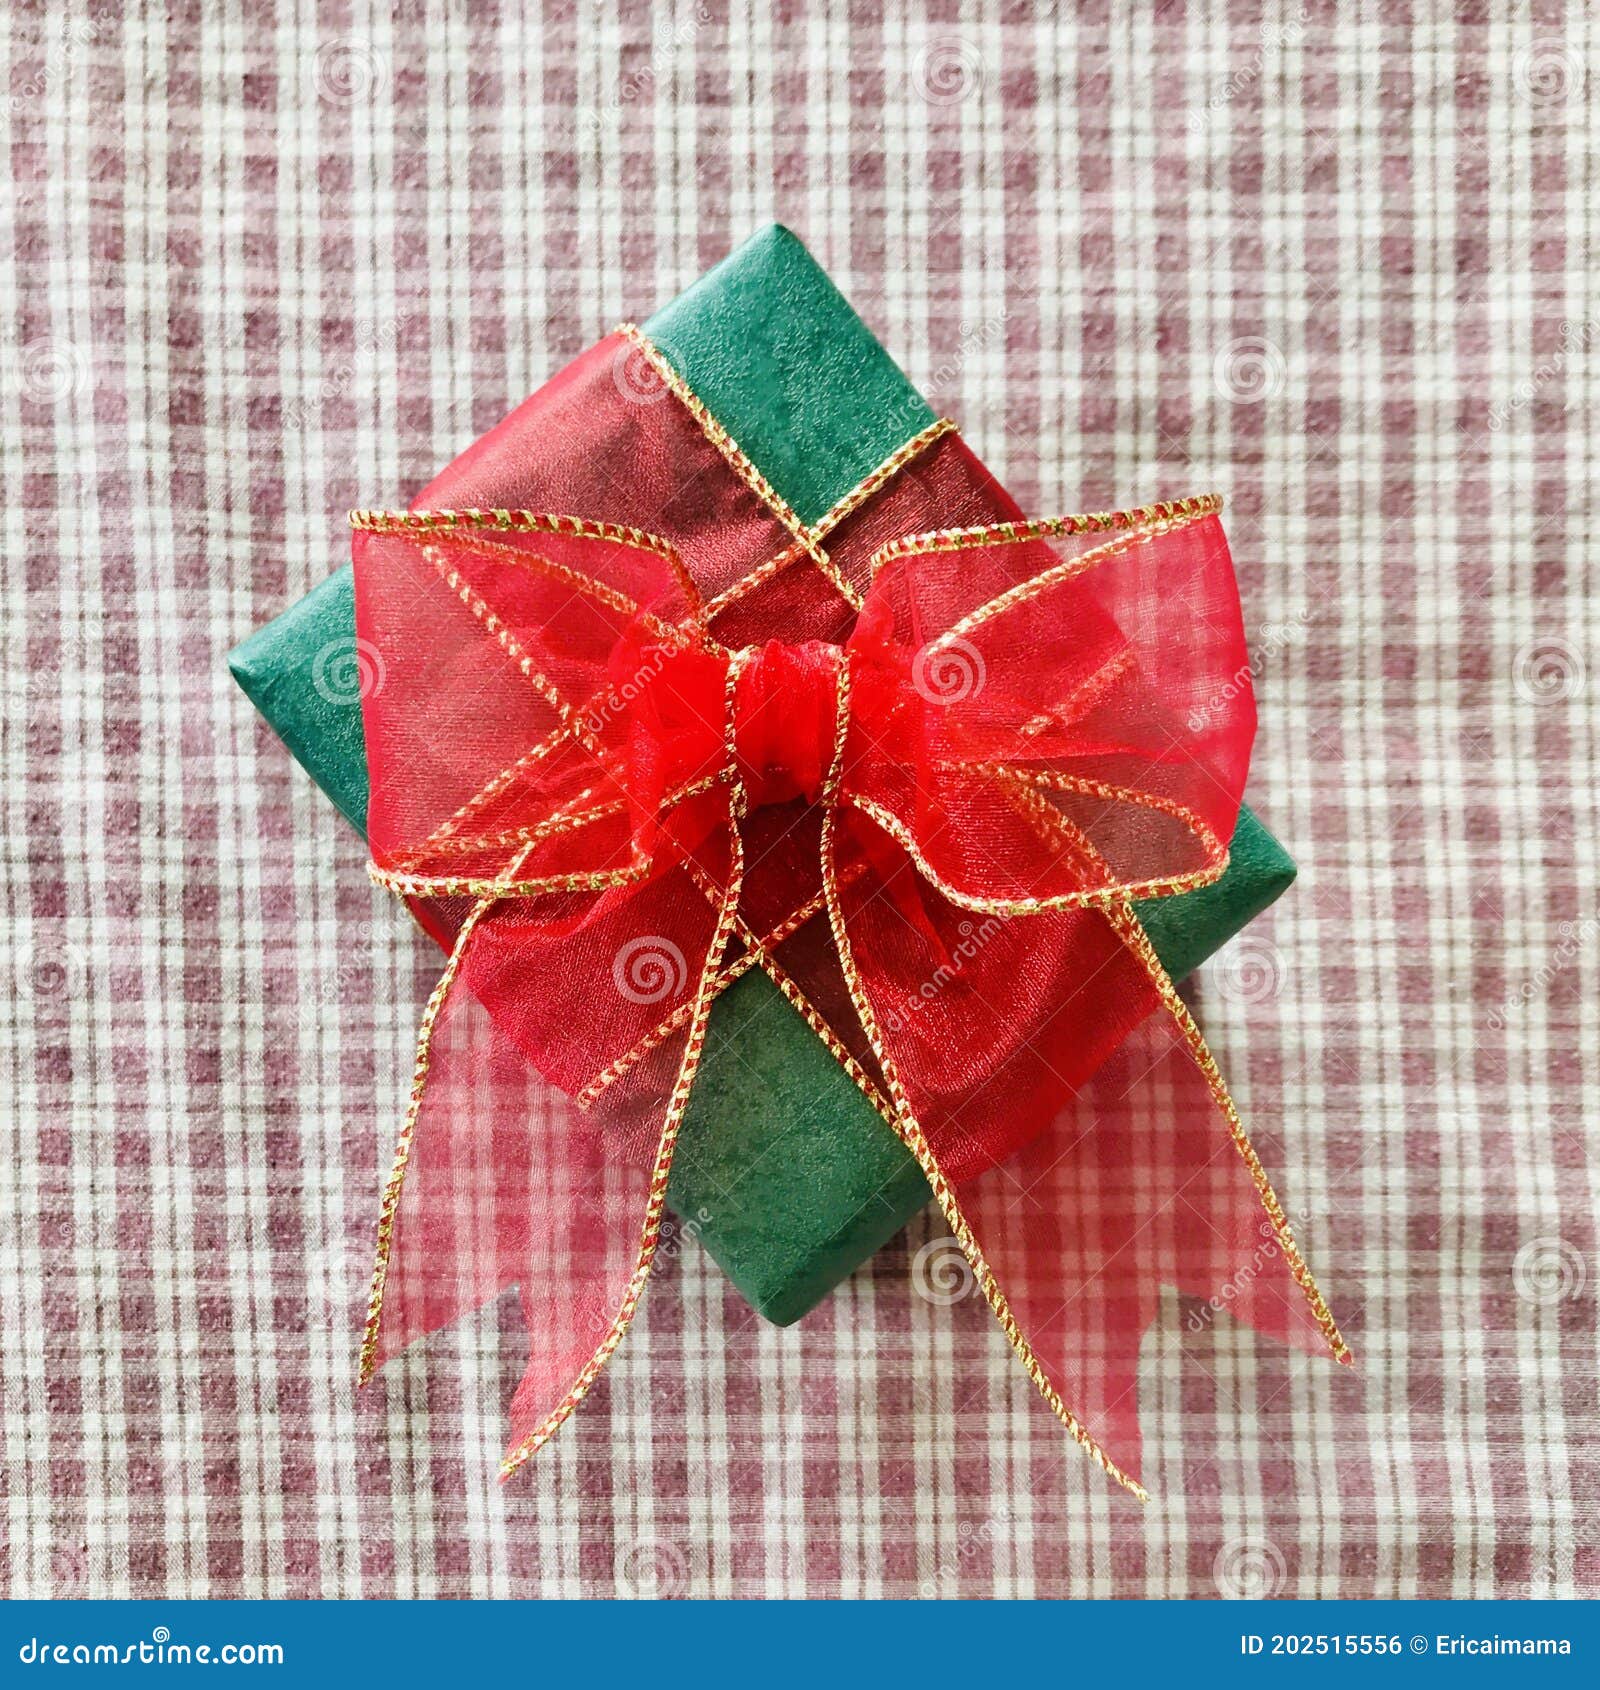 green gift with red ribbon on red white plaid tablecloth background.